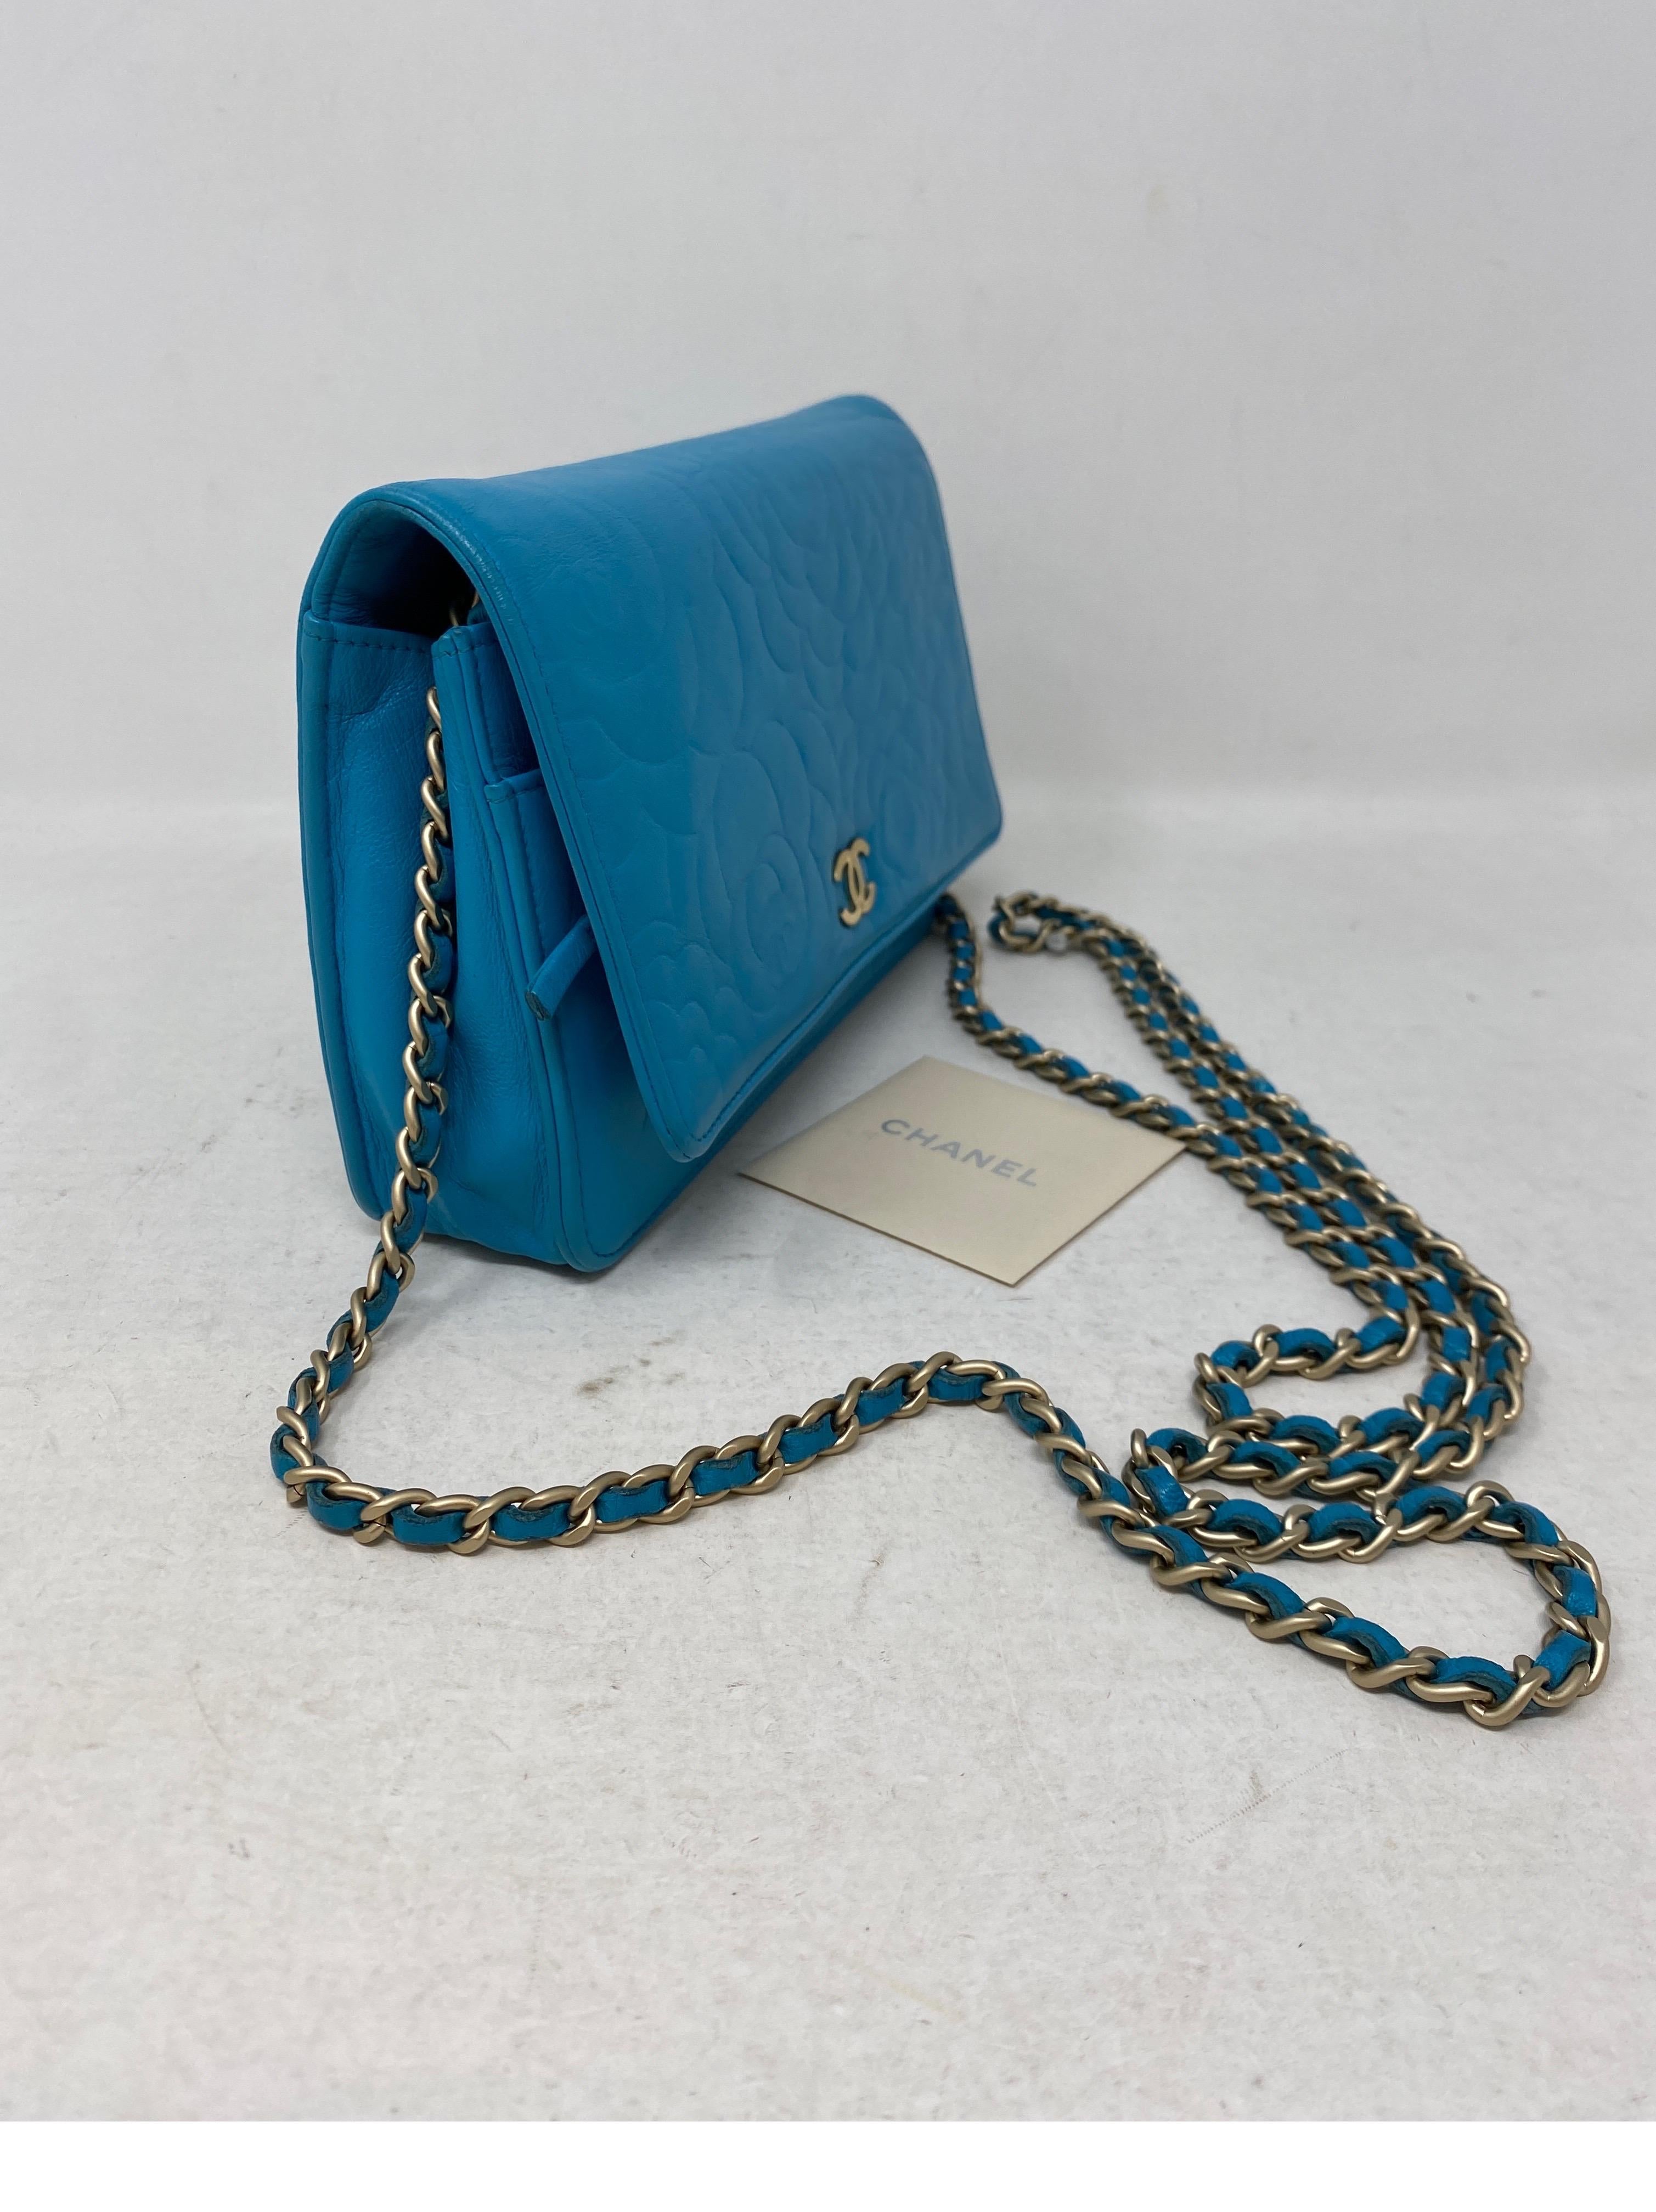 Chanel Teal Wallet On A Chain Bag  6